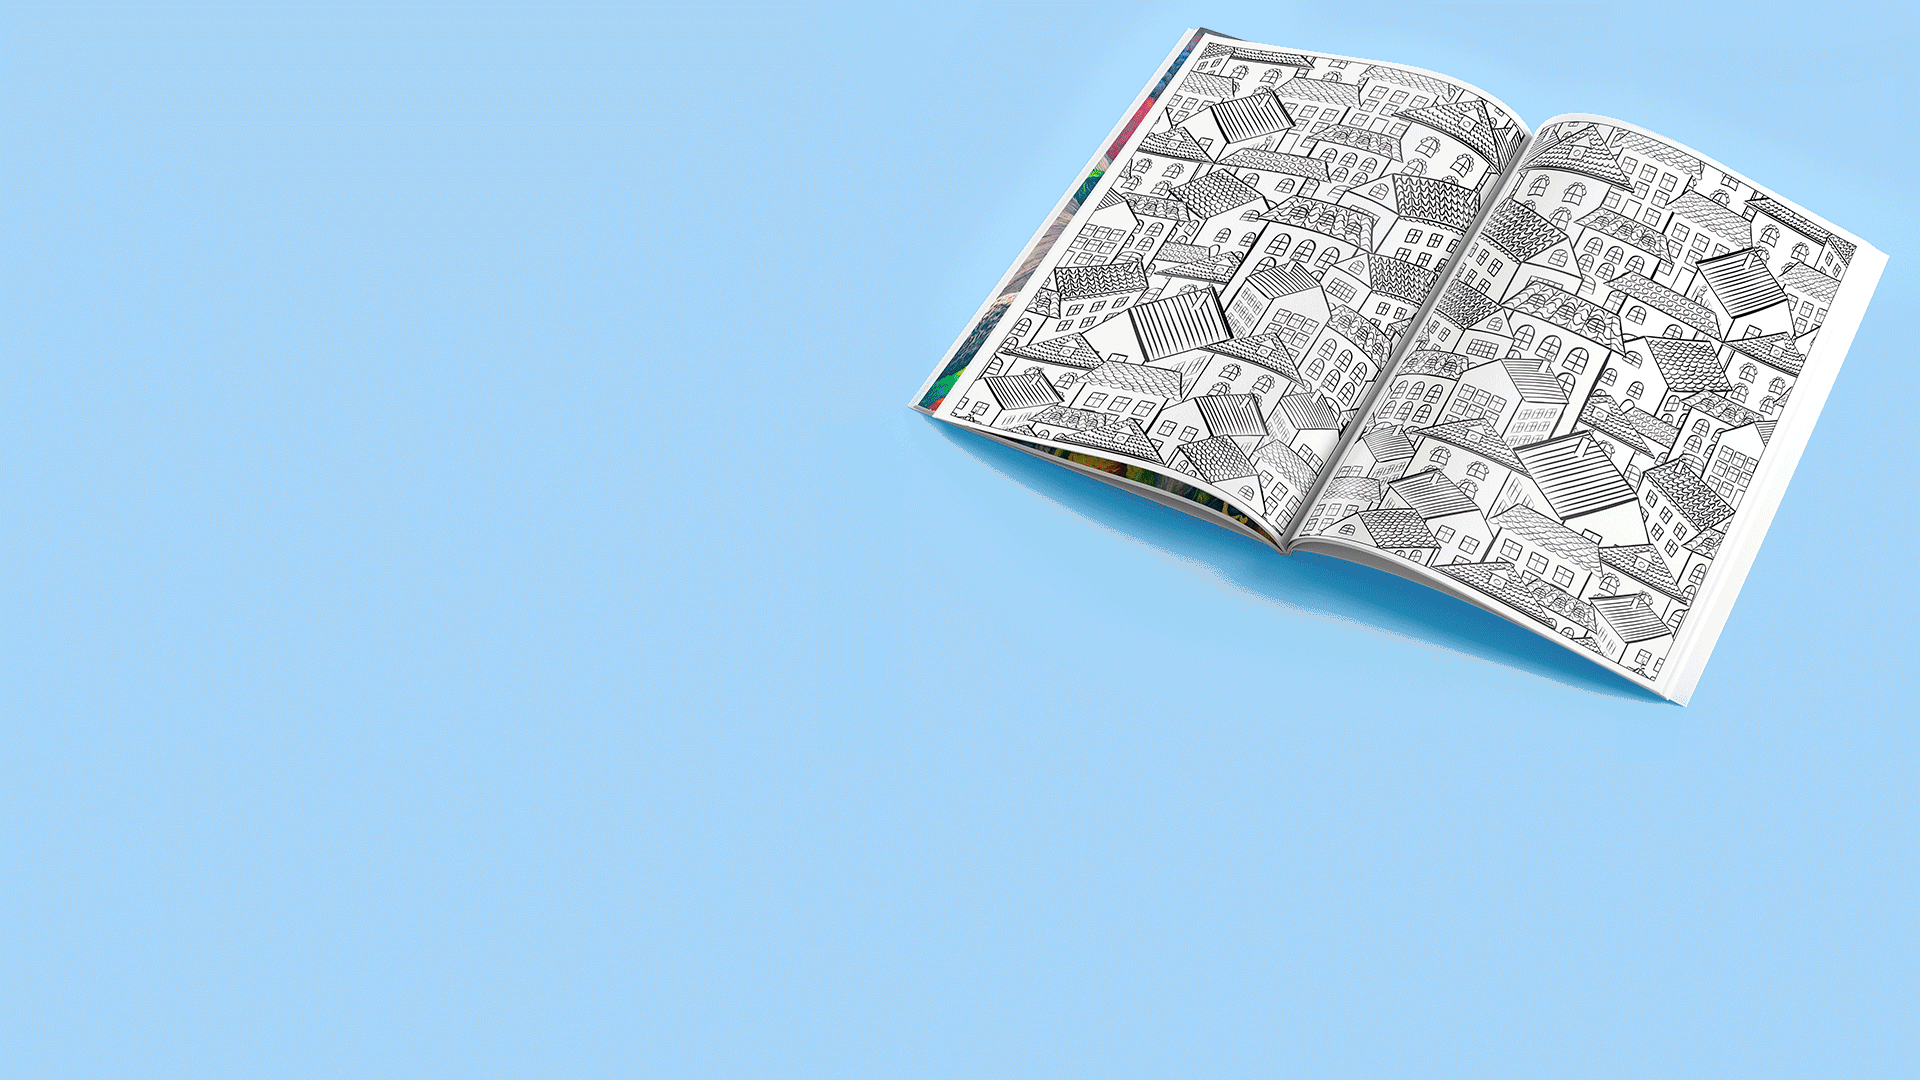 https://www.blurb.com/blog/wp-content/uploads/2021/02/20210219_HowtoMakeYourOwnColoringBook_1920x1080_v1.gif